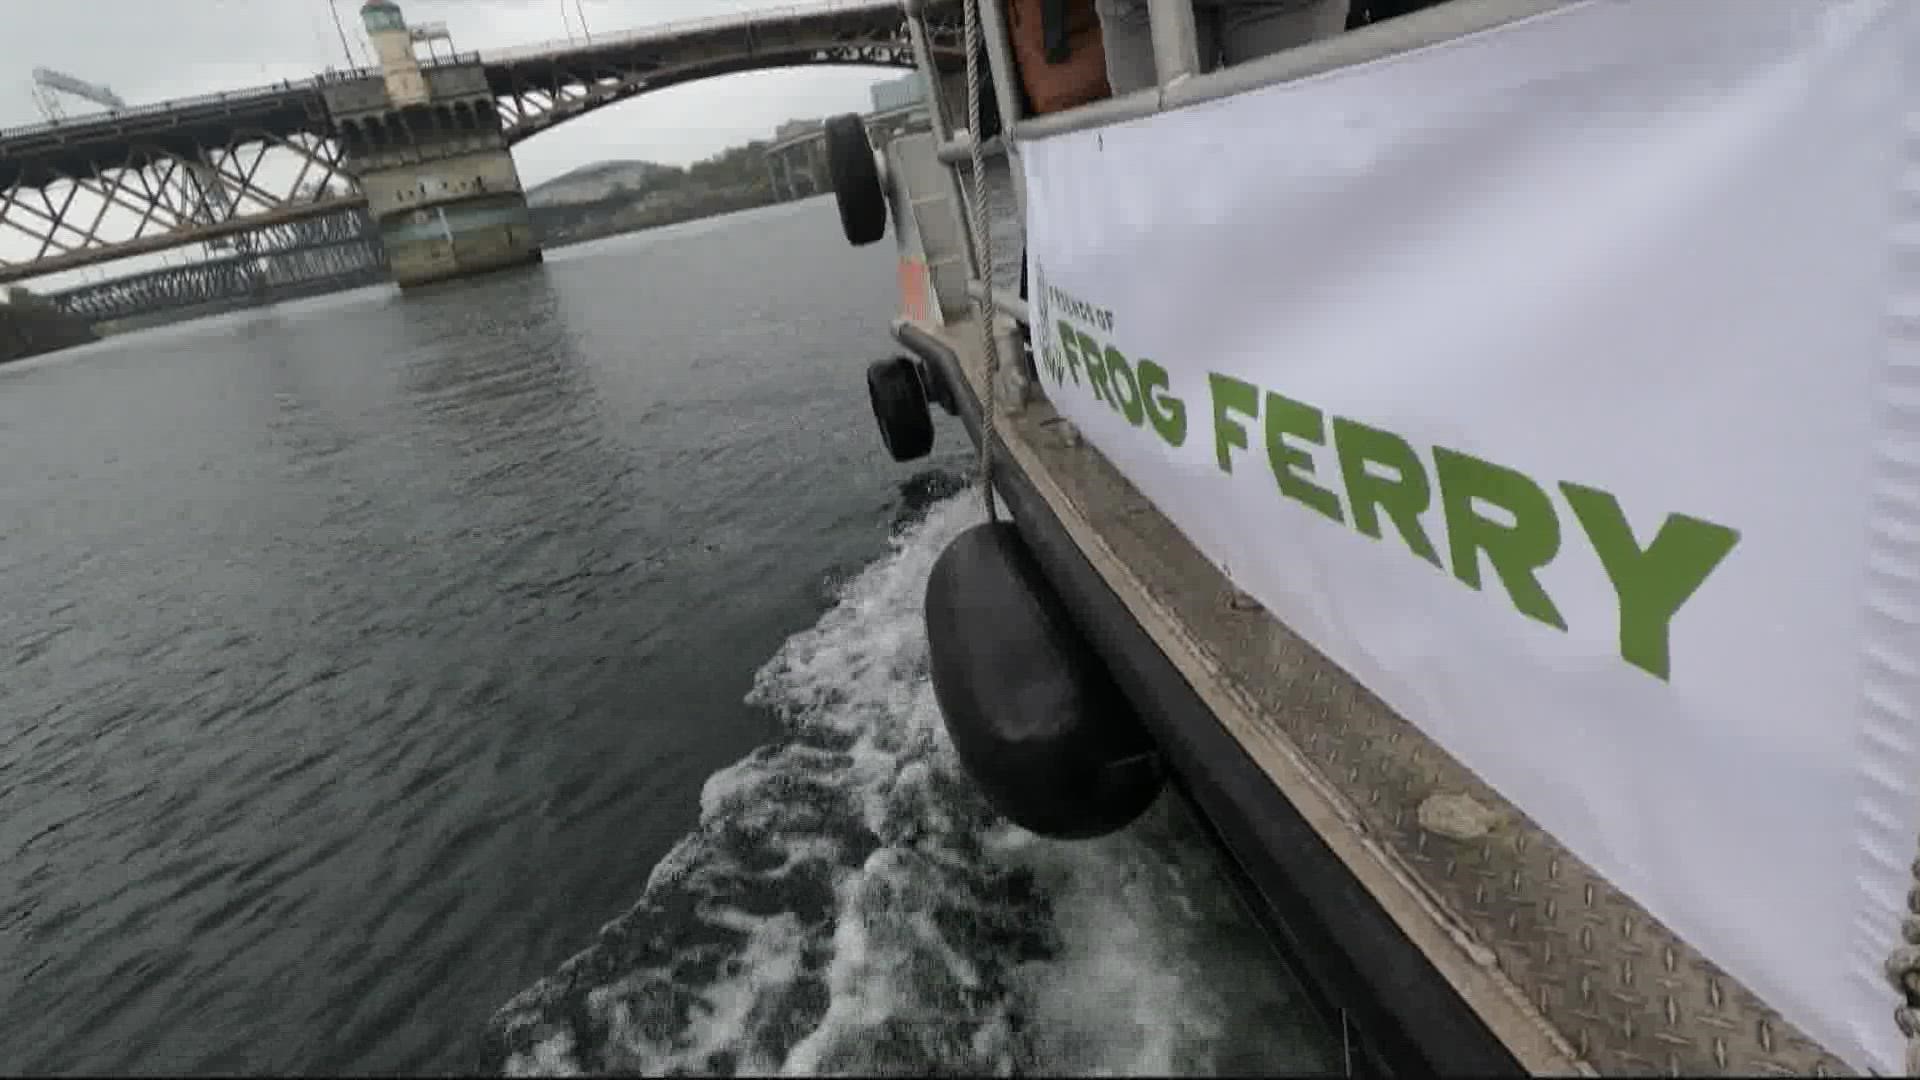 The Frog Ferry is scheduled to be up and running in less than two years. It will carry passengers from Cathedral Park to RiverPlace downtown Portland.